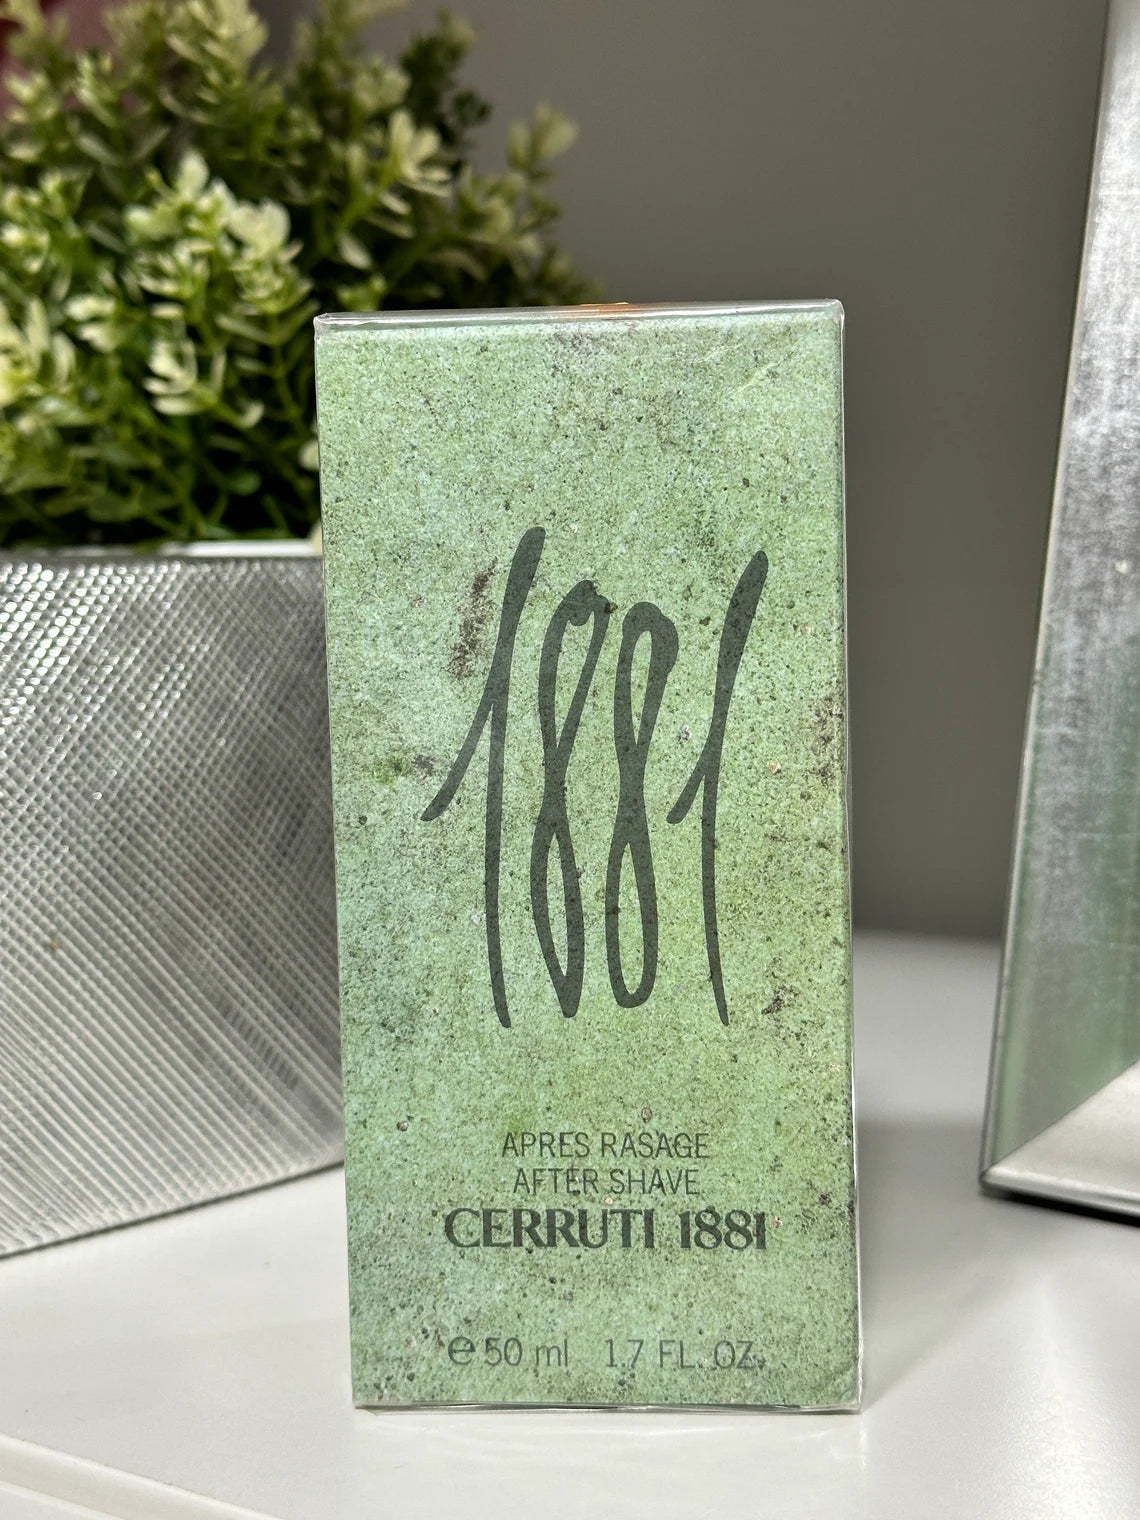 CERRUTI 1881 AFTER SHAVE After shave new in box SEALED 50ml